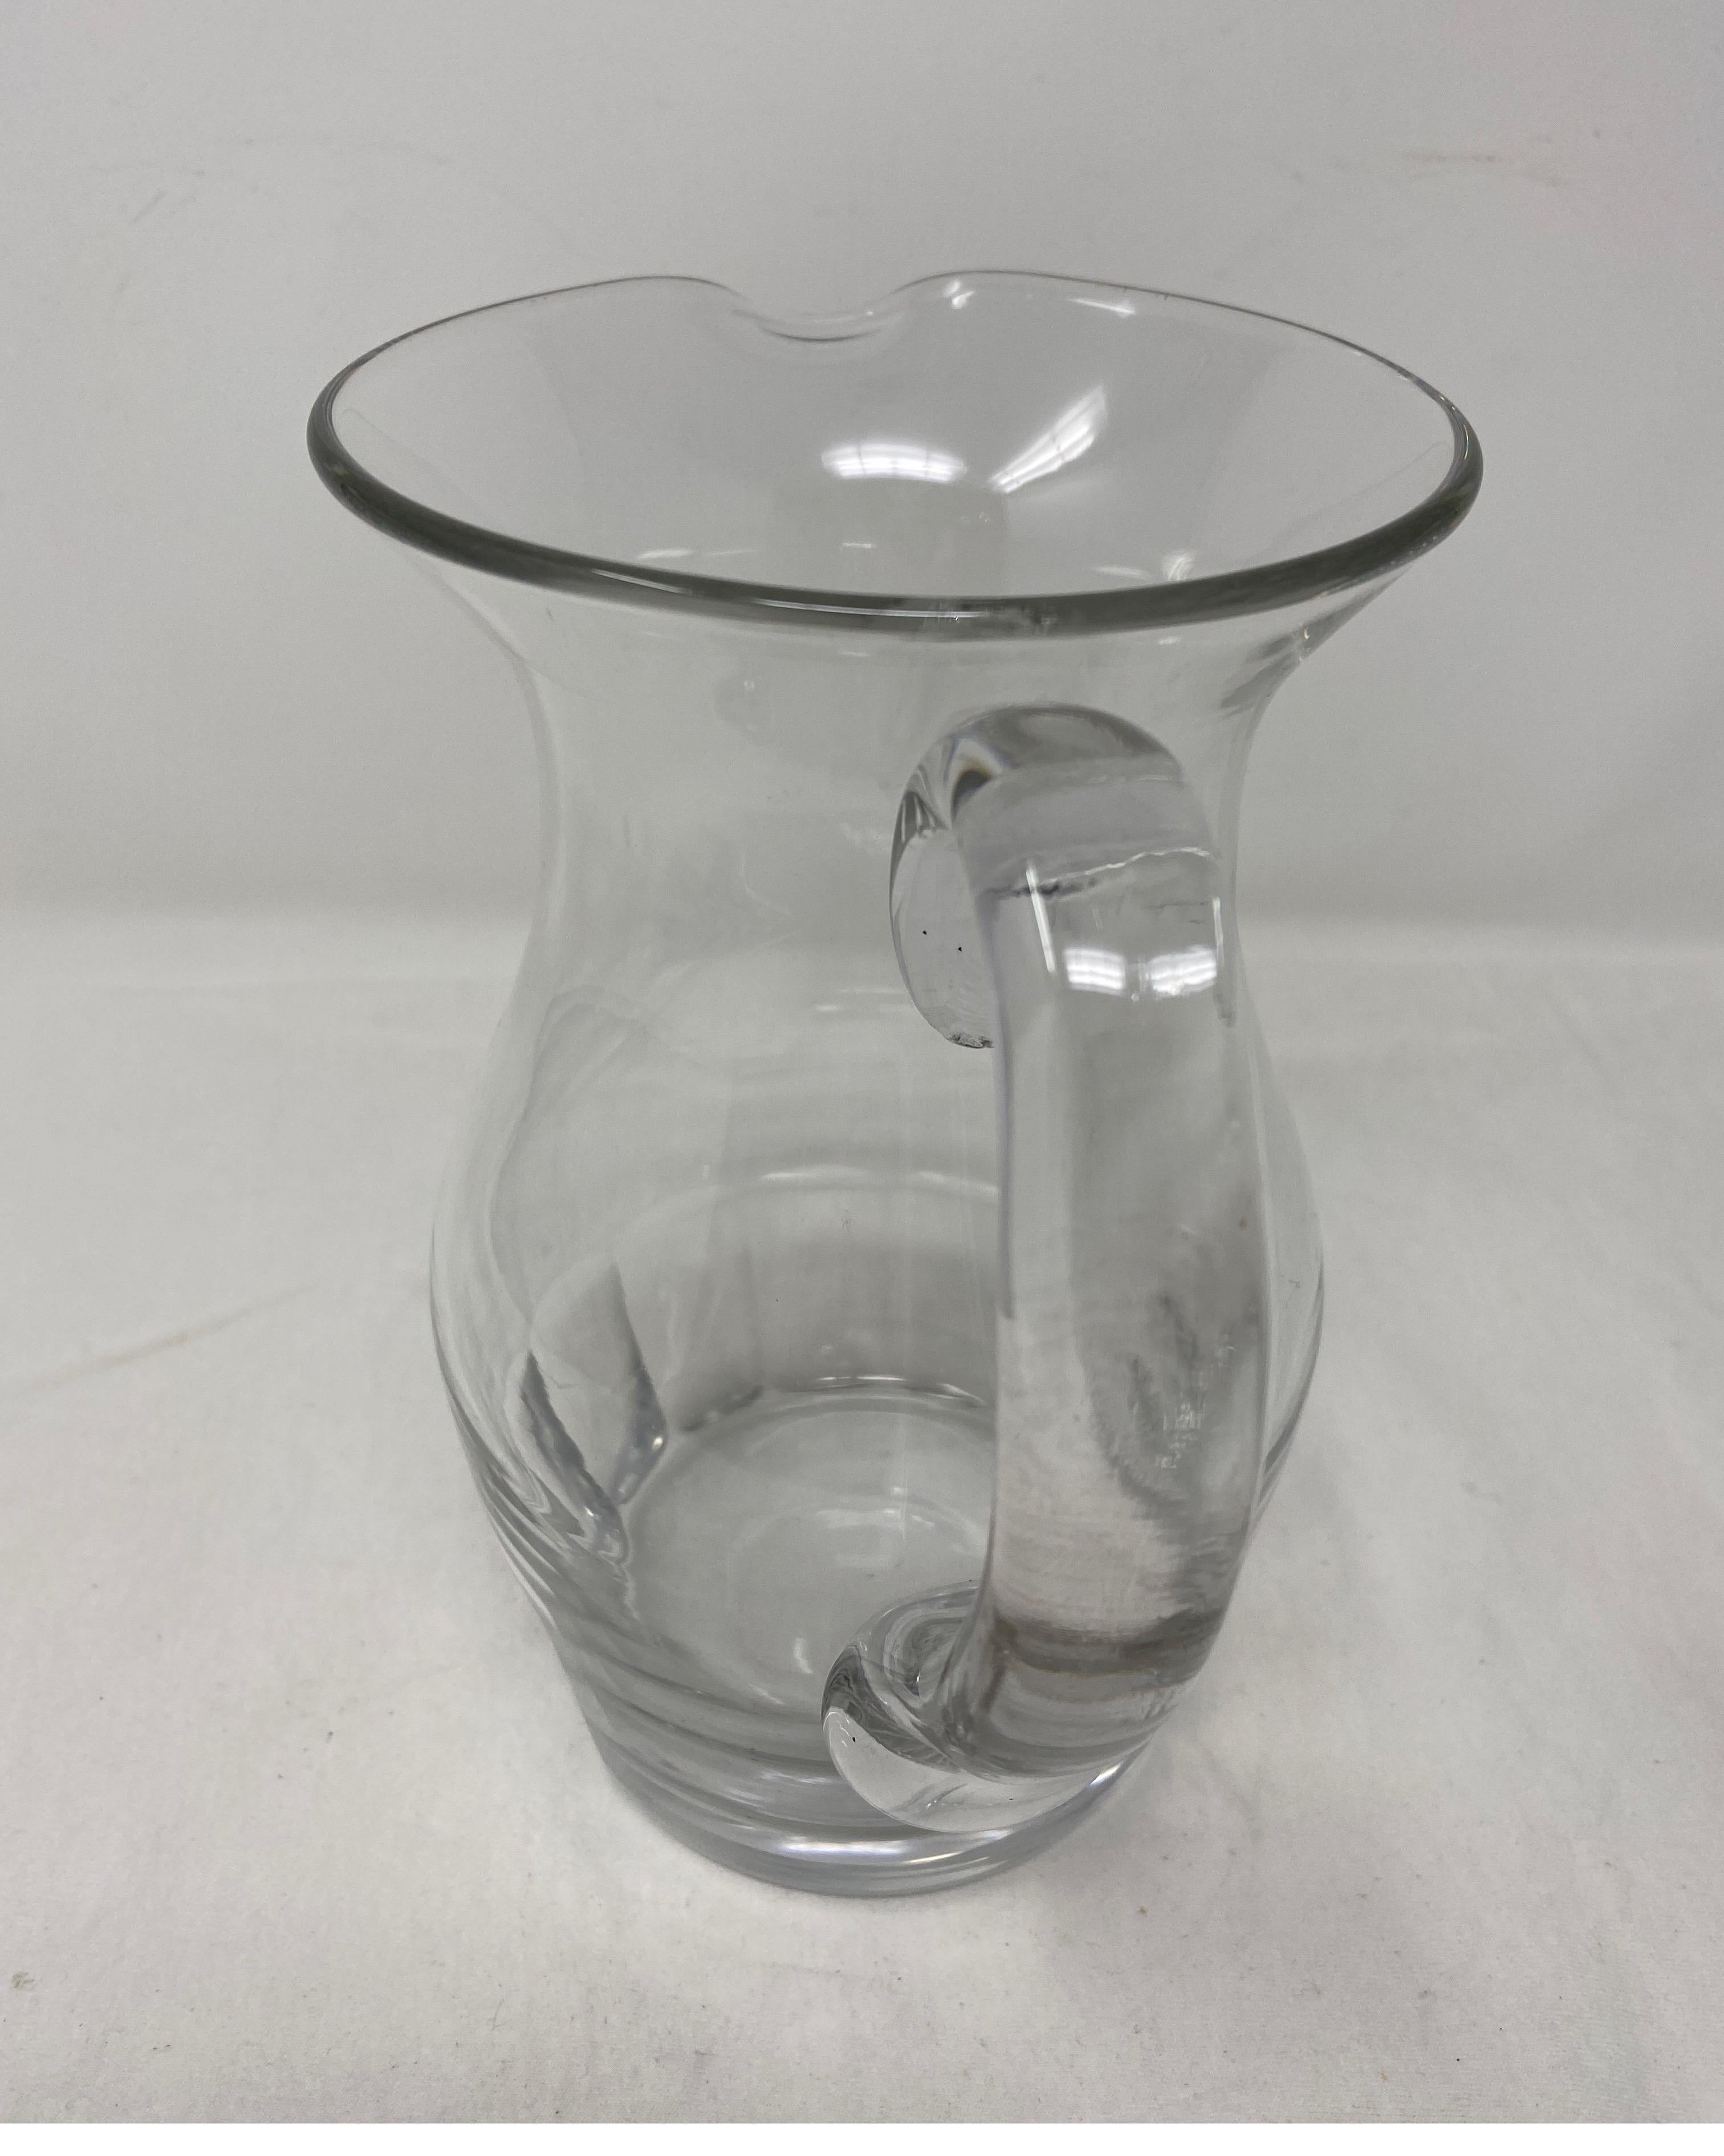 Antique crystal pitcher. 19th century.
6.5